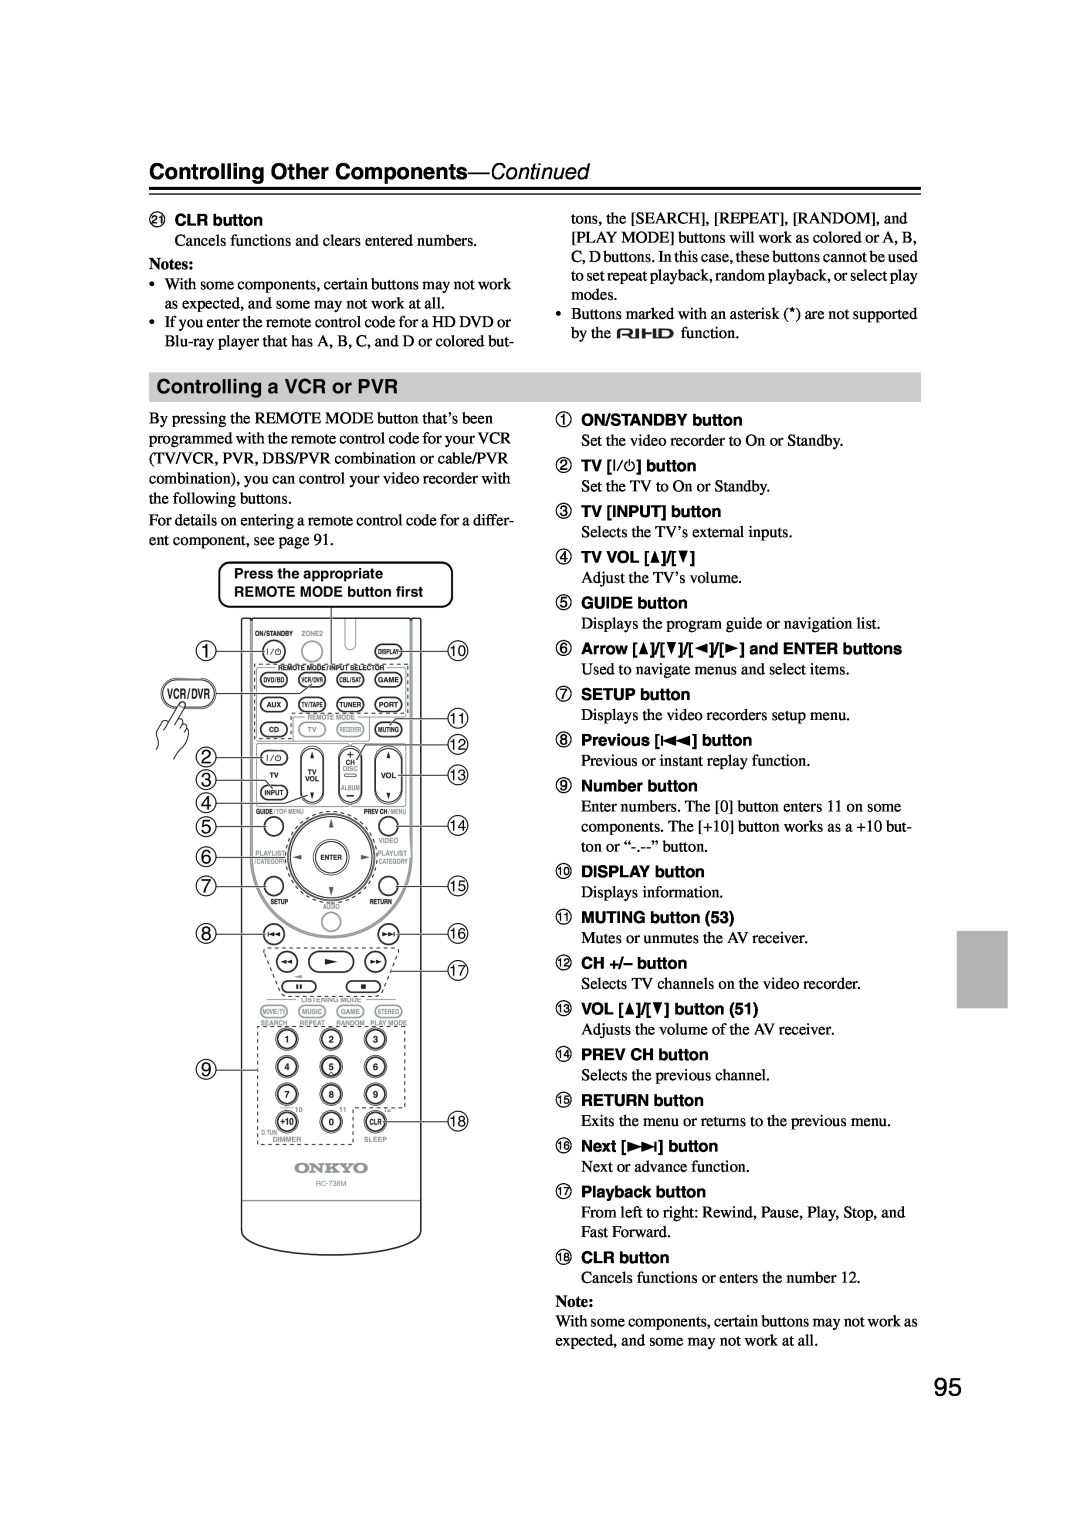 Onkyo SR607 instruction manual Controlling a VCR or PVR, Controlling Other Components—Continued 